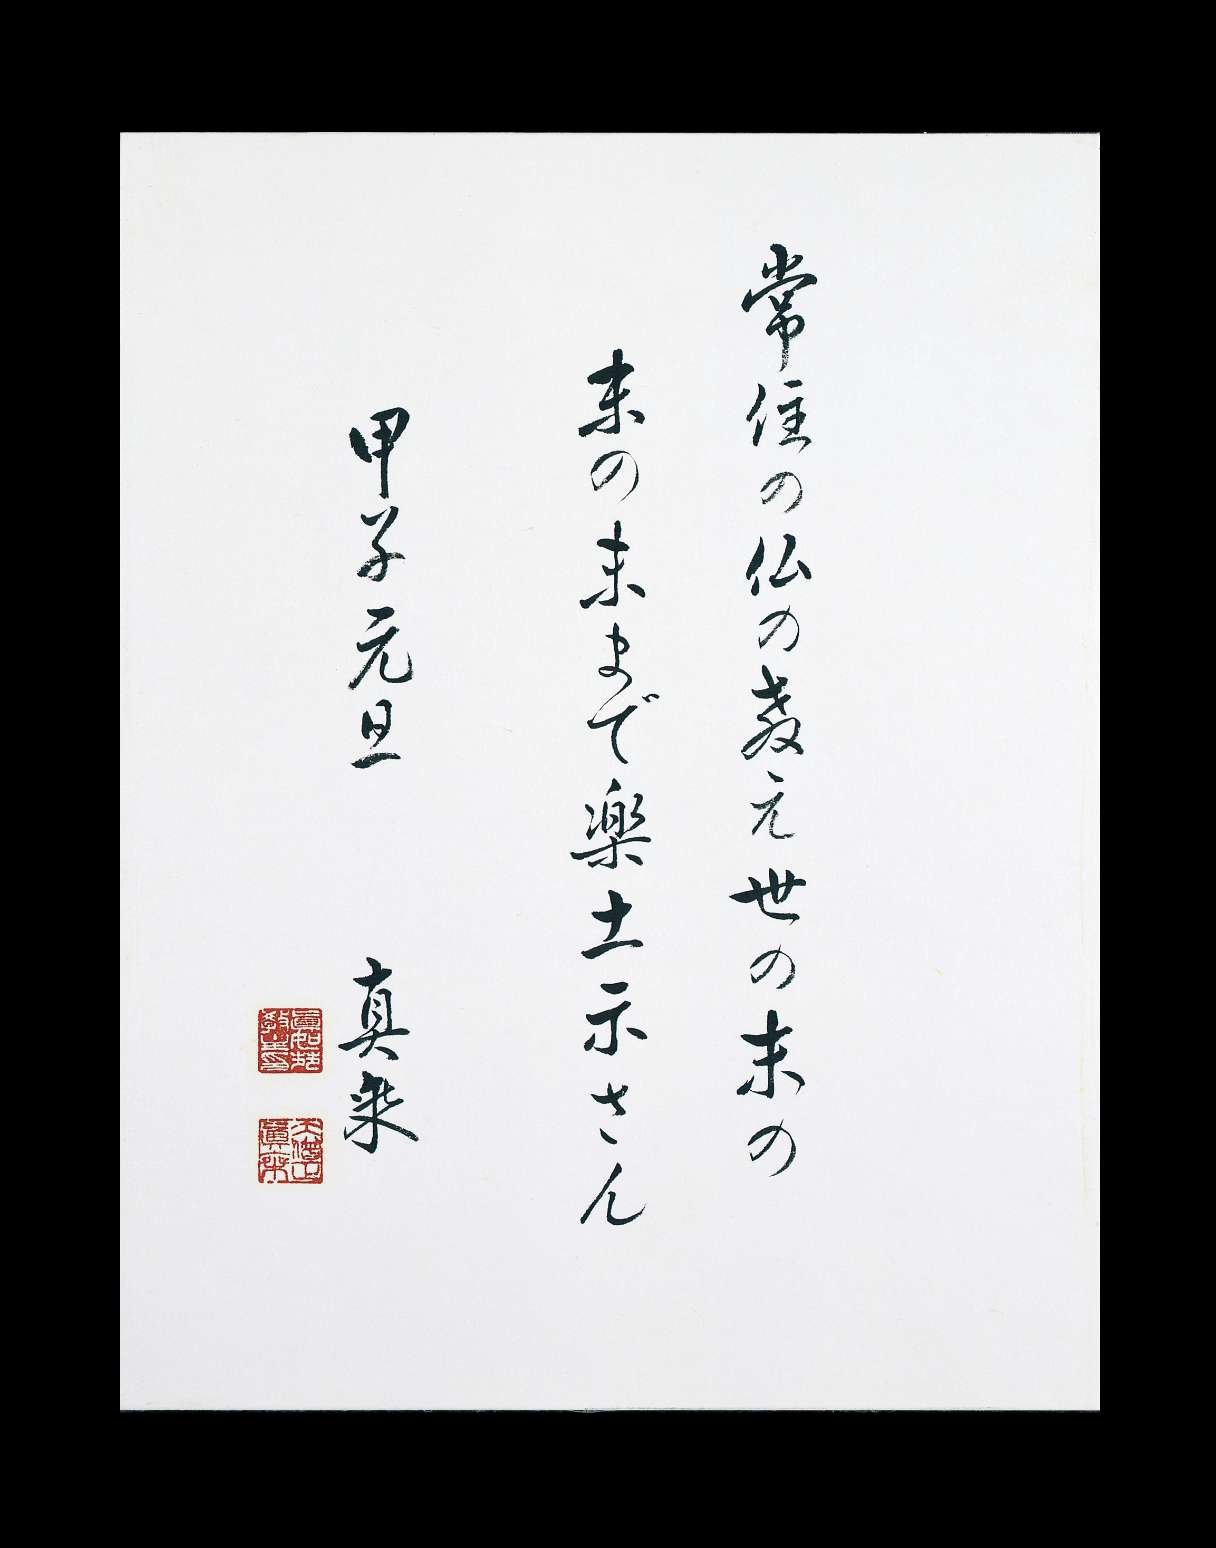 Three vertical lines of swift Japanese calligraphy are written with brush on an upright rectangular sheet of paper; to the left appear a signature and two stamp impressions in red.